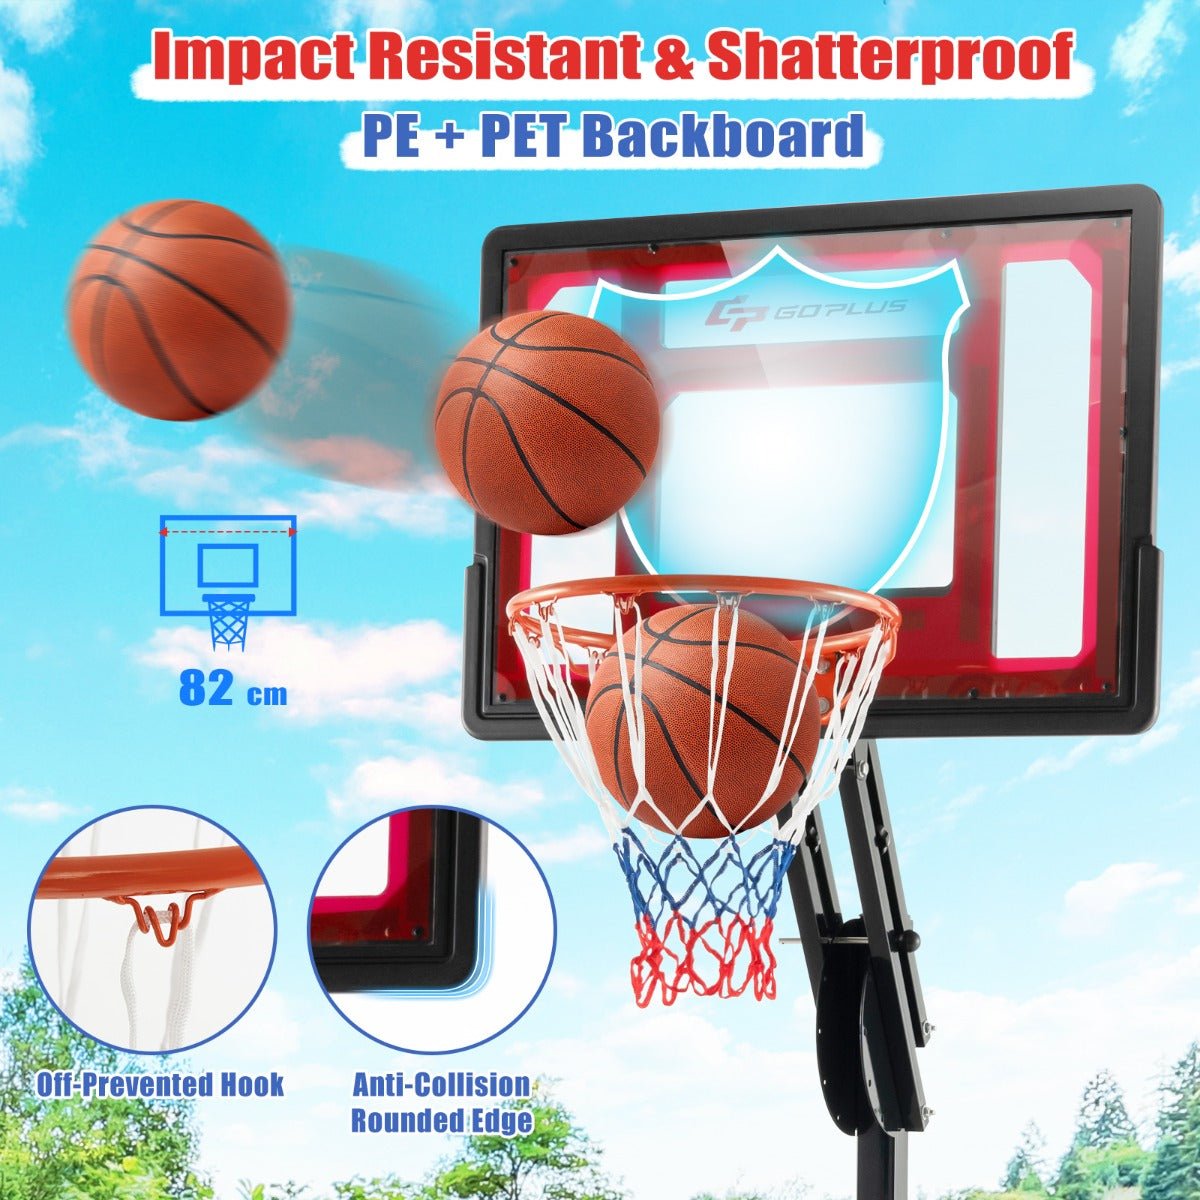 Upgrade Your Basketball Game - Shop Adjustable Hoops Now!